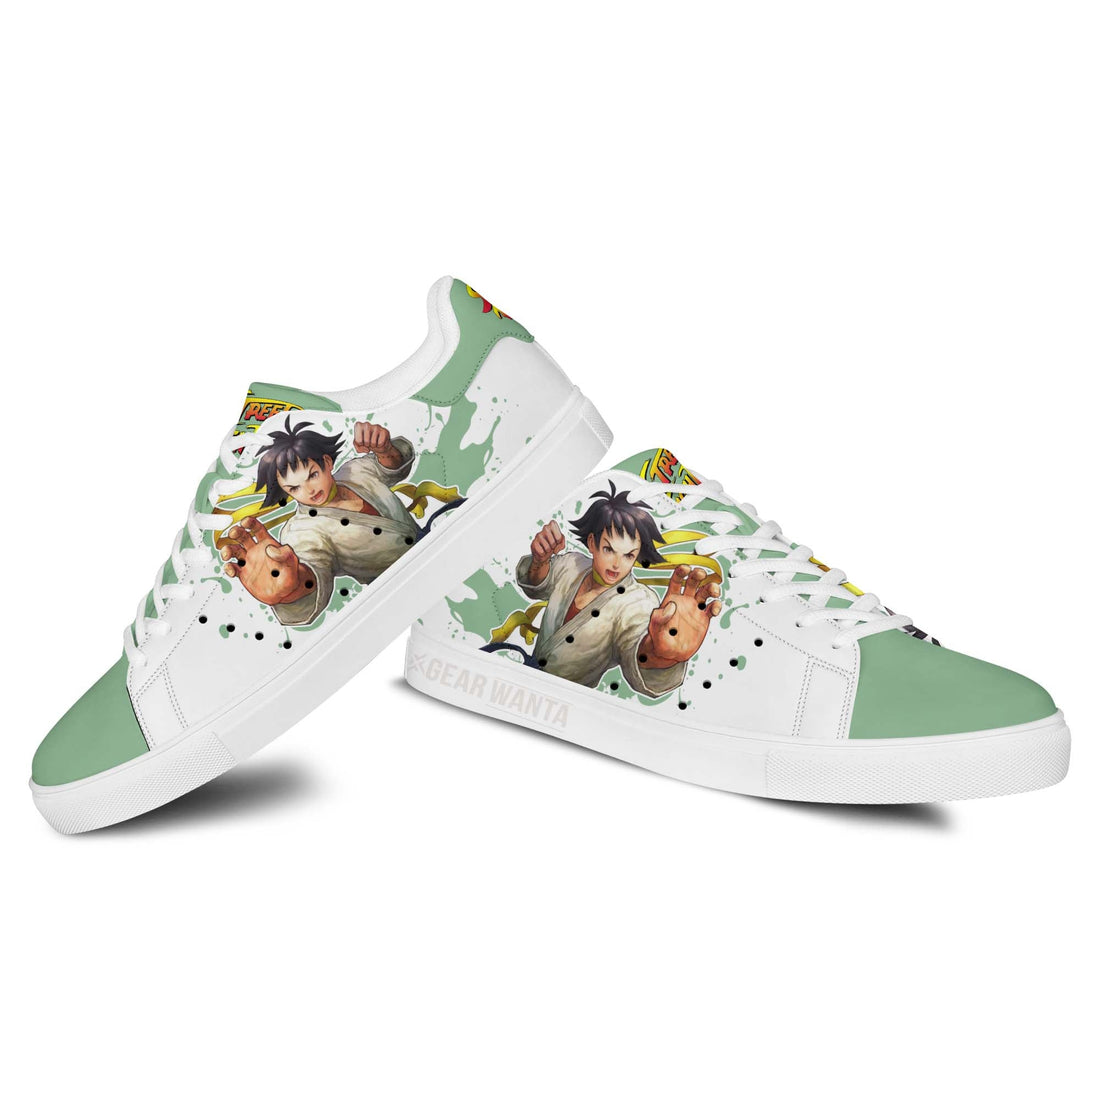 Makoto Stan Shoes Custom Street Fighter Game Shoes-Gear Wanta